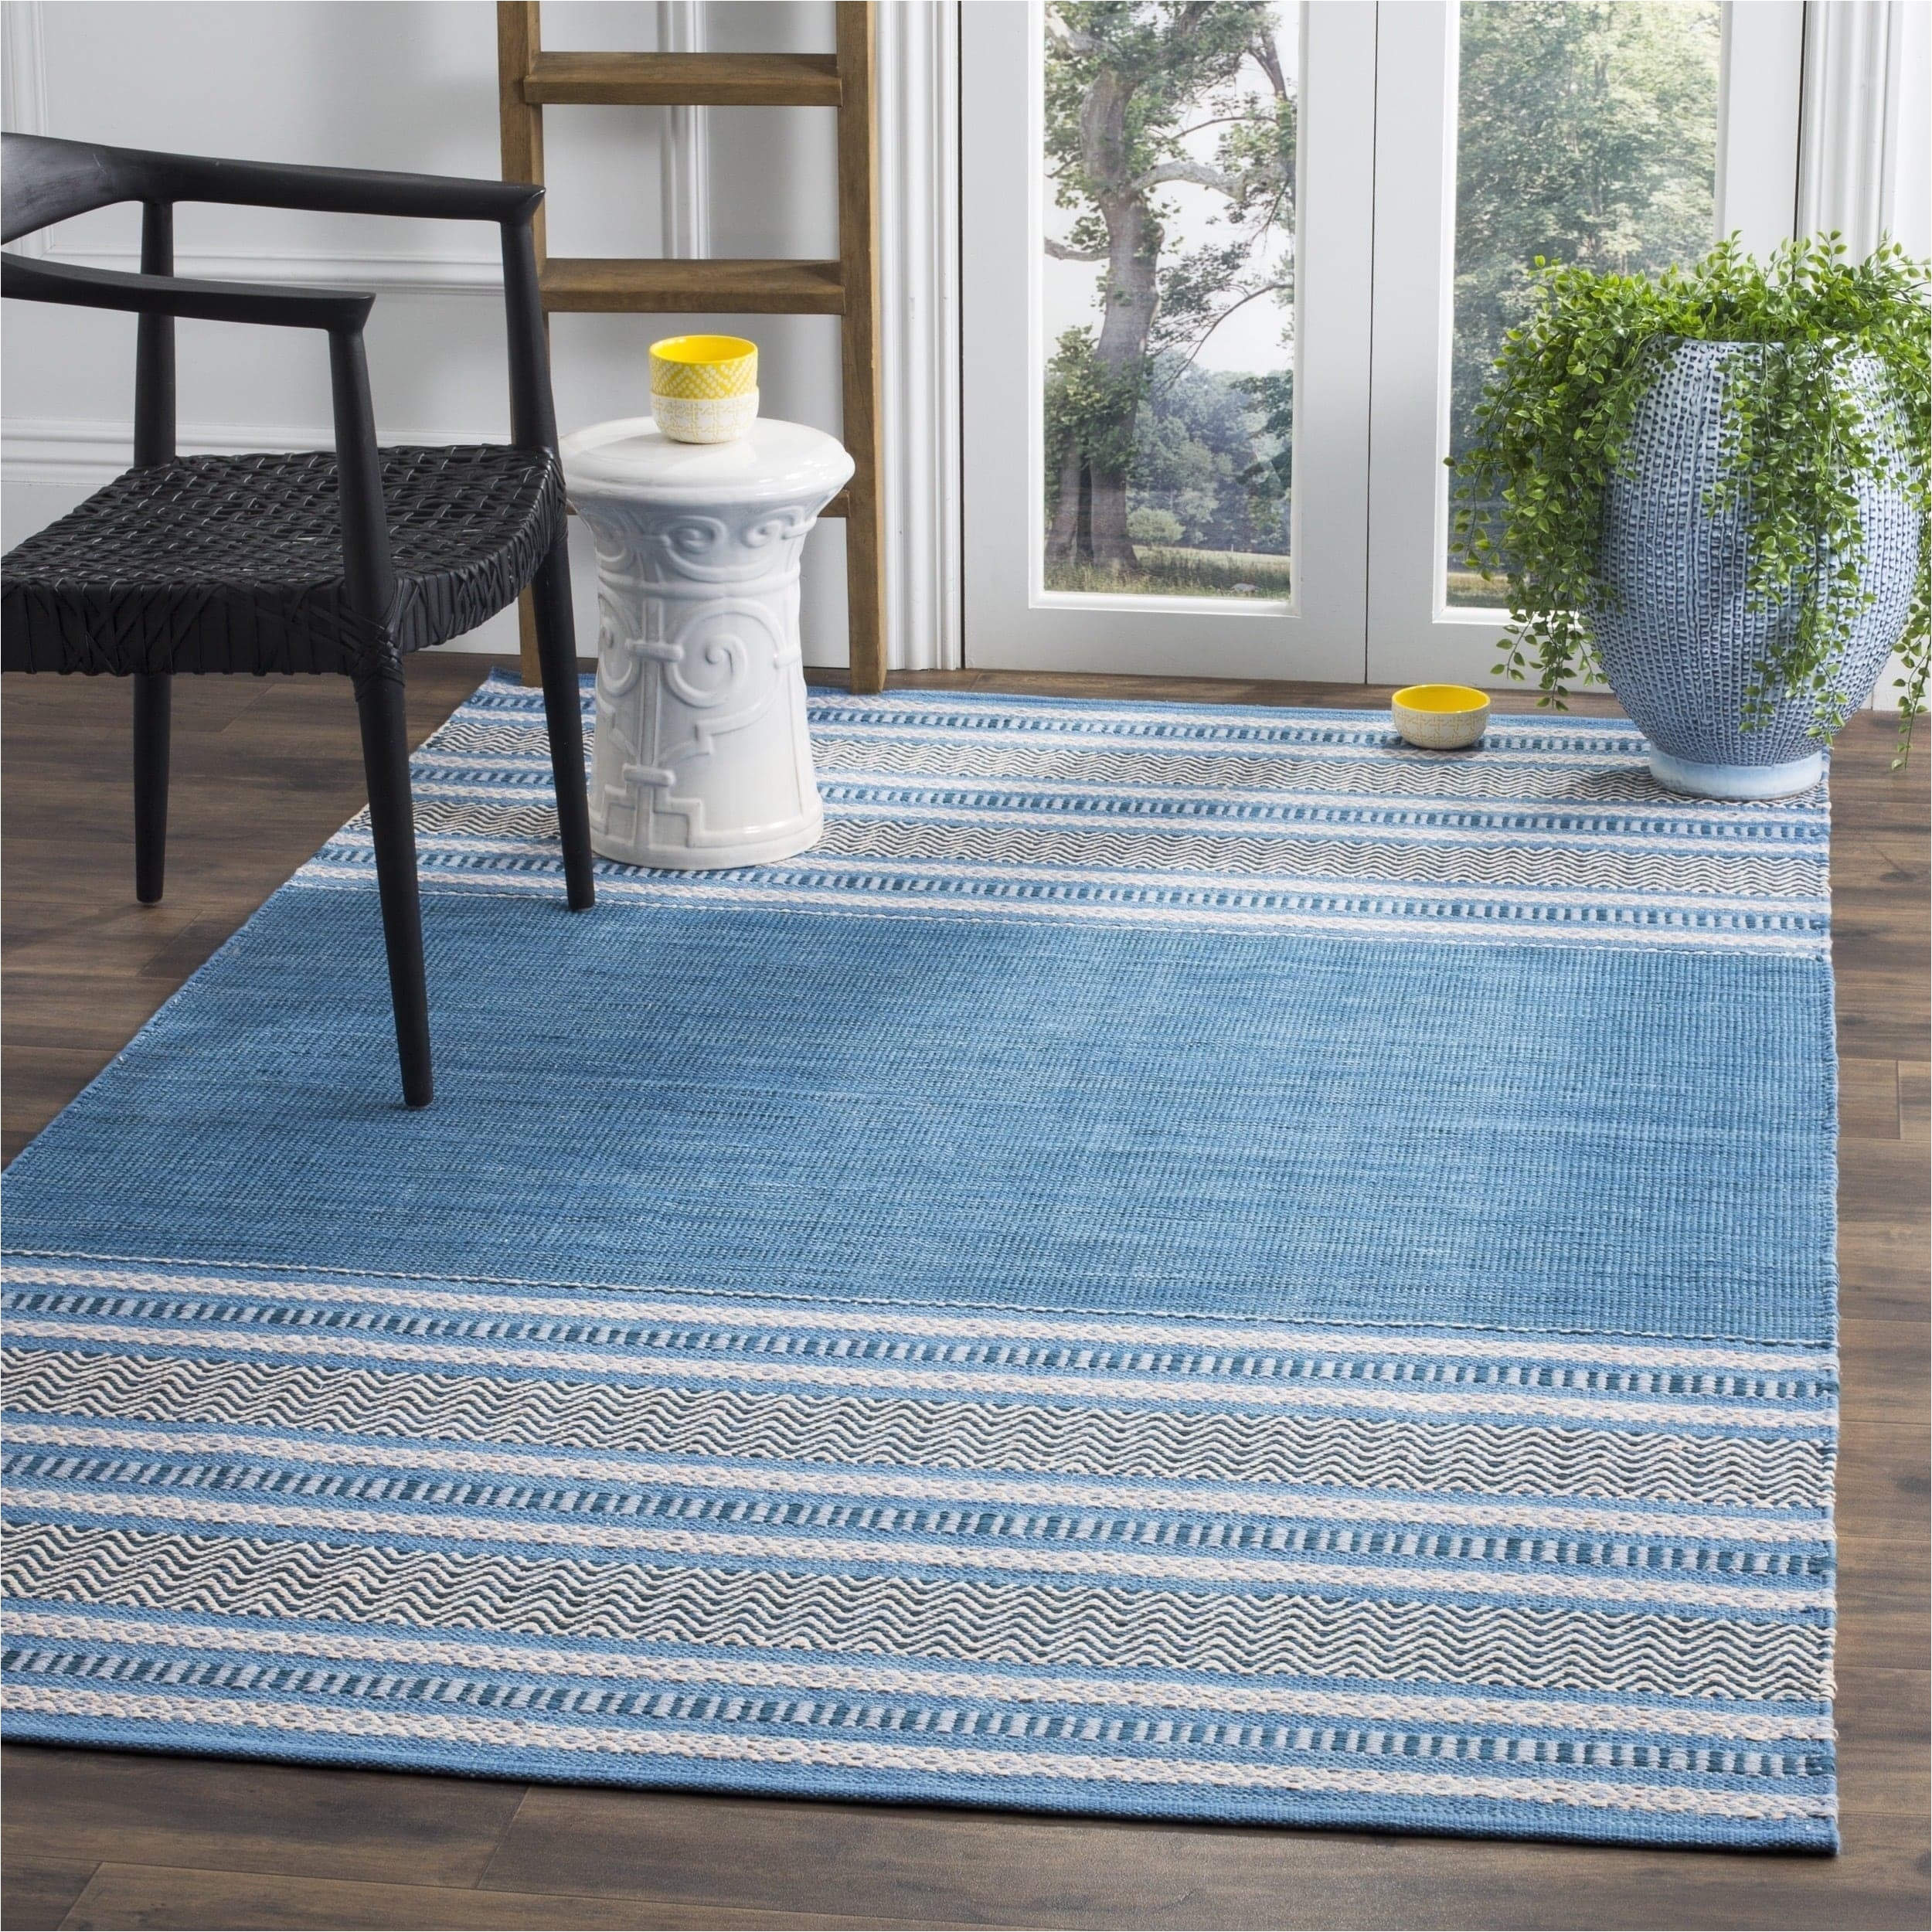 shop safavieh montauk hand woven blue grey cotton area rug 8 x 10 on sale free shipping today overstock com 15315233